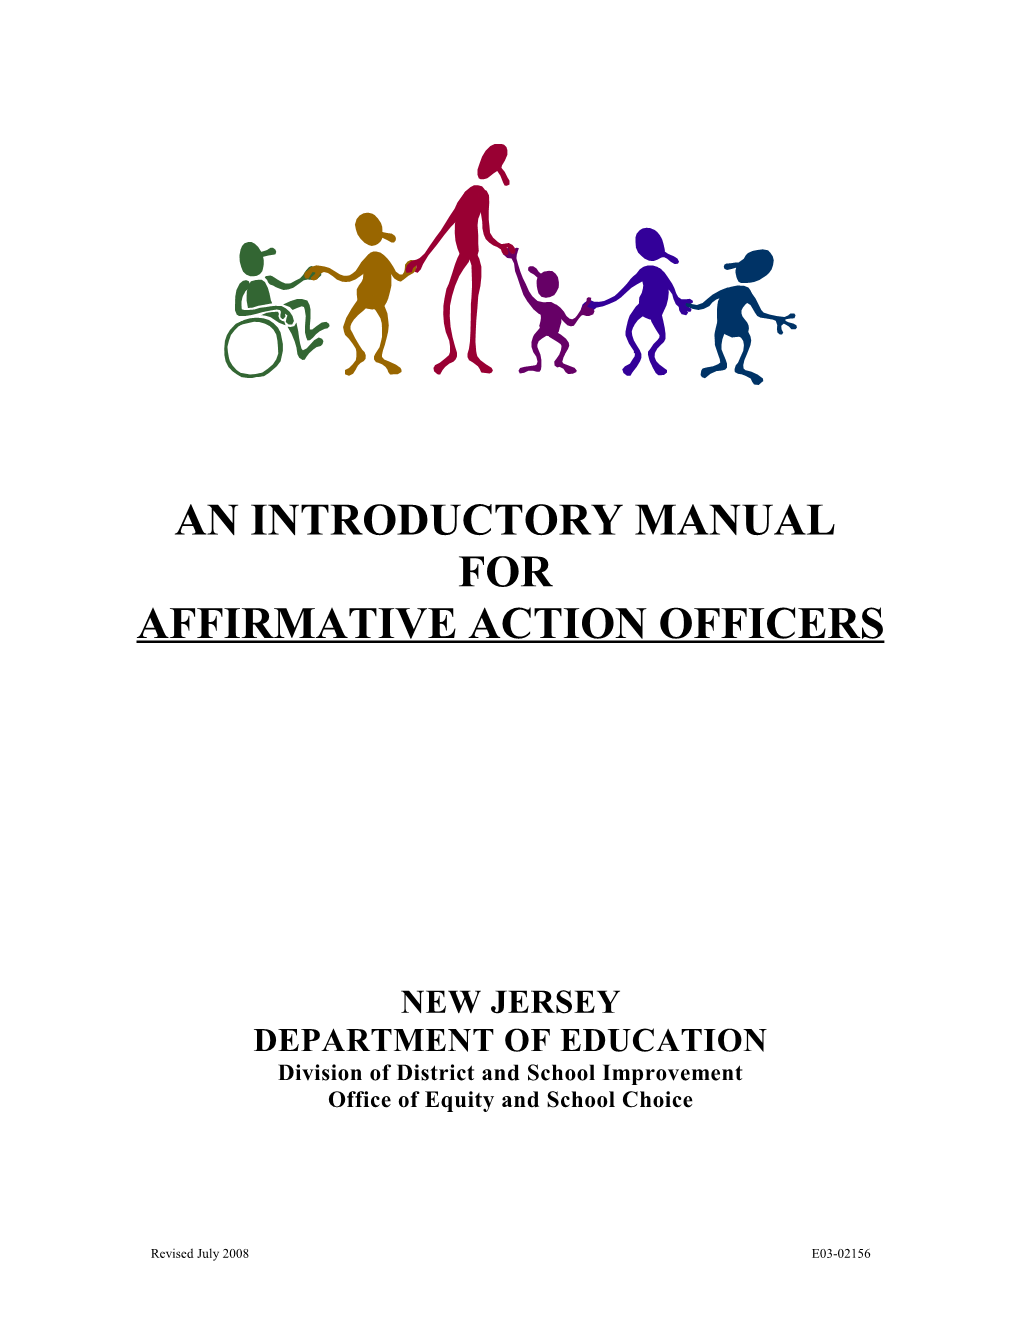 An Introductory Manual for Affirmative Action Officers